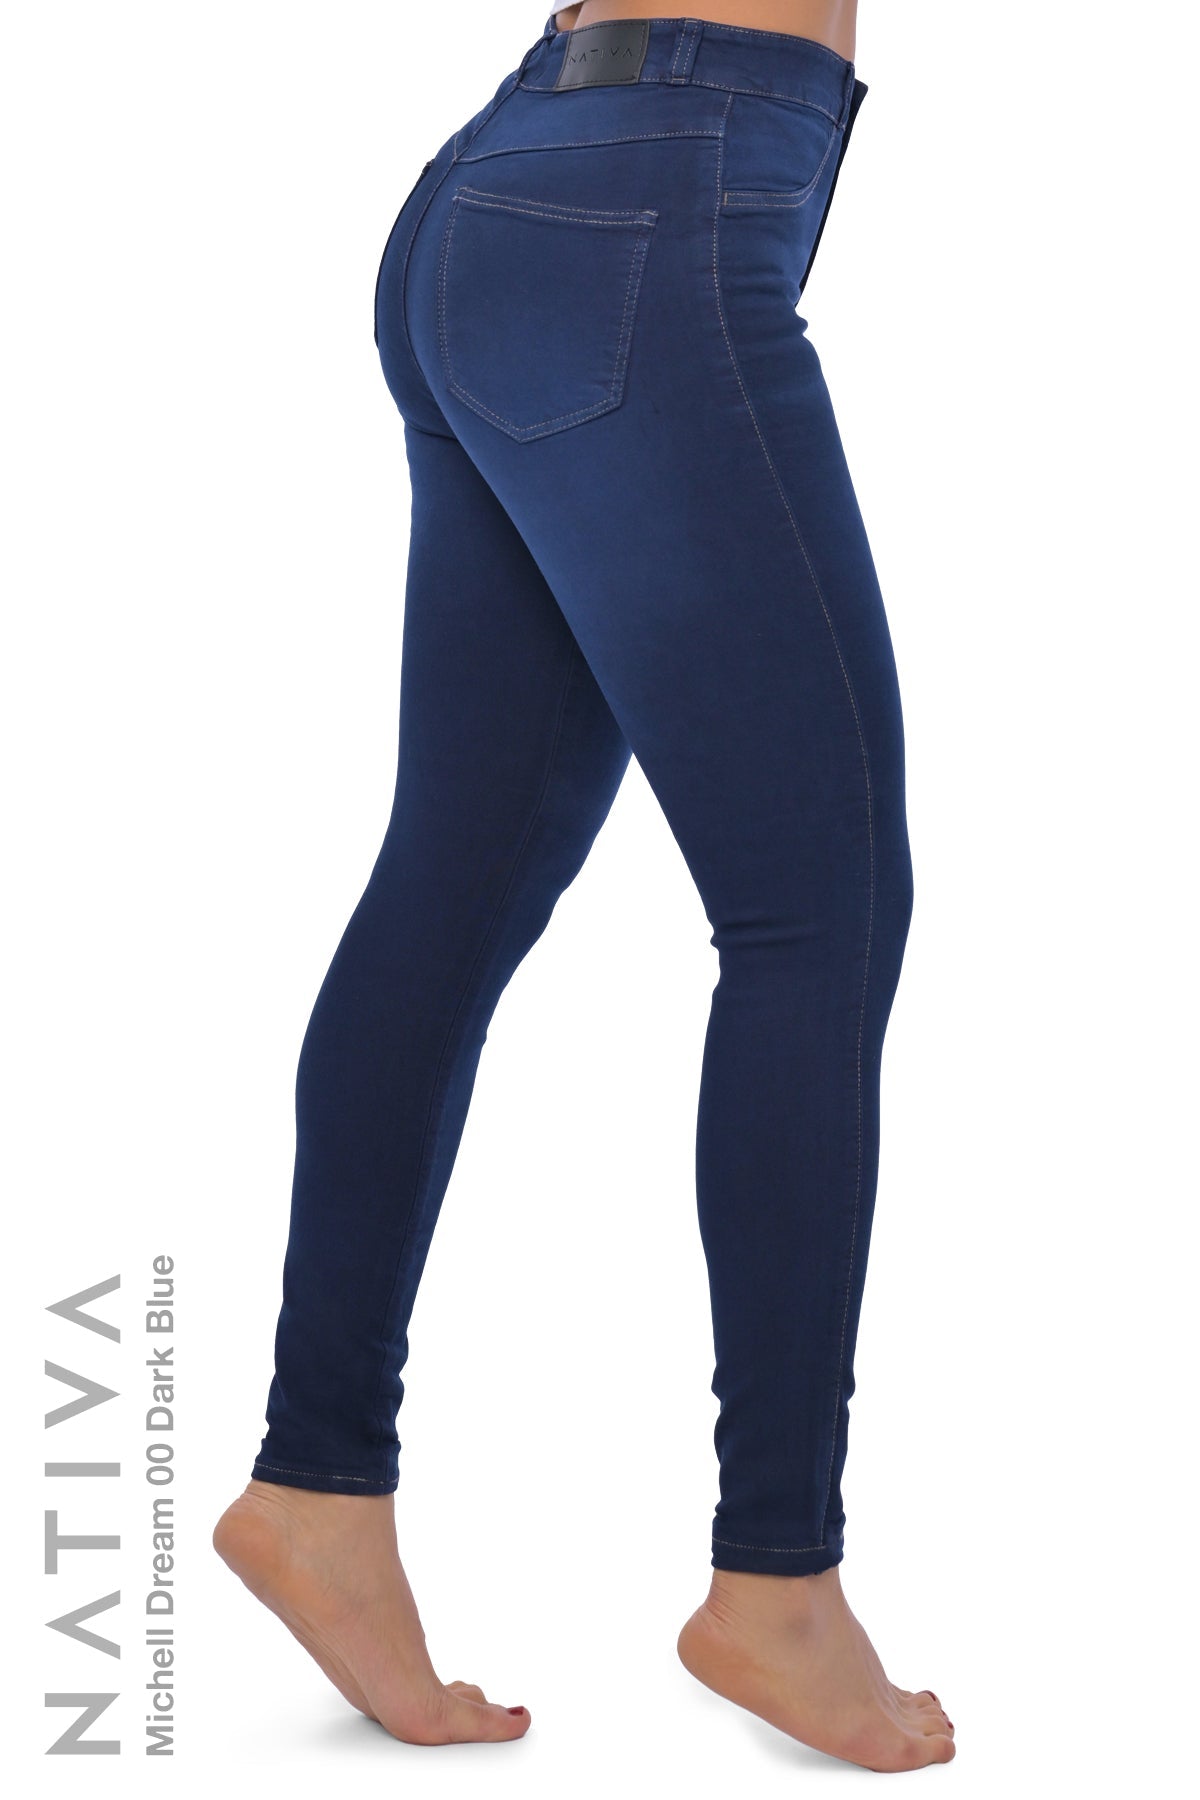 Shop Dream Stretch Collection for Jeans Online